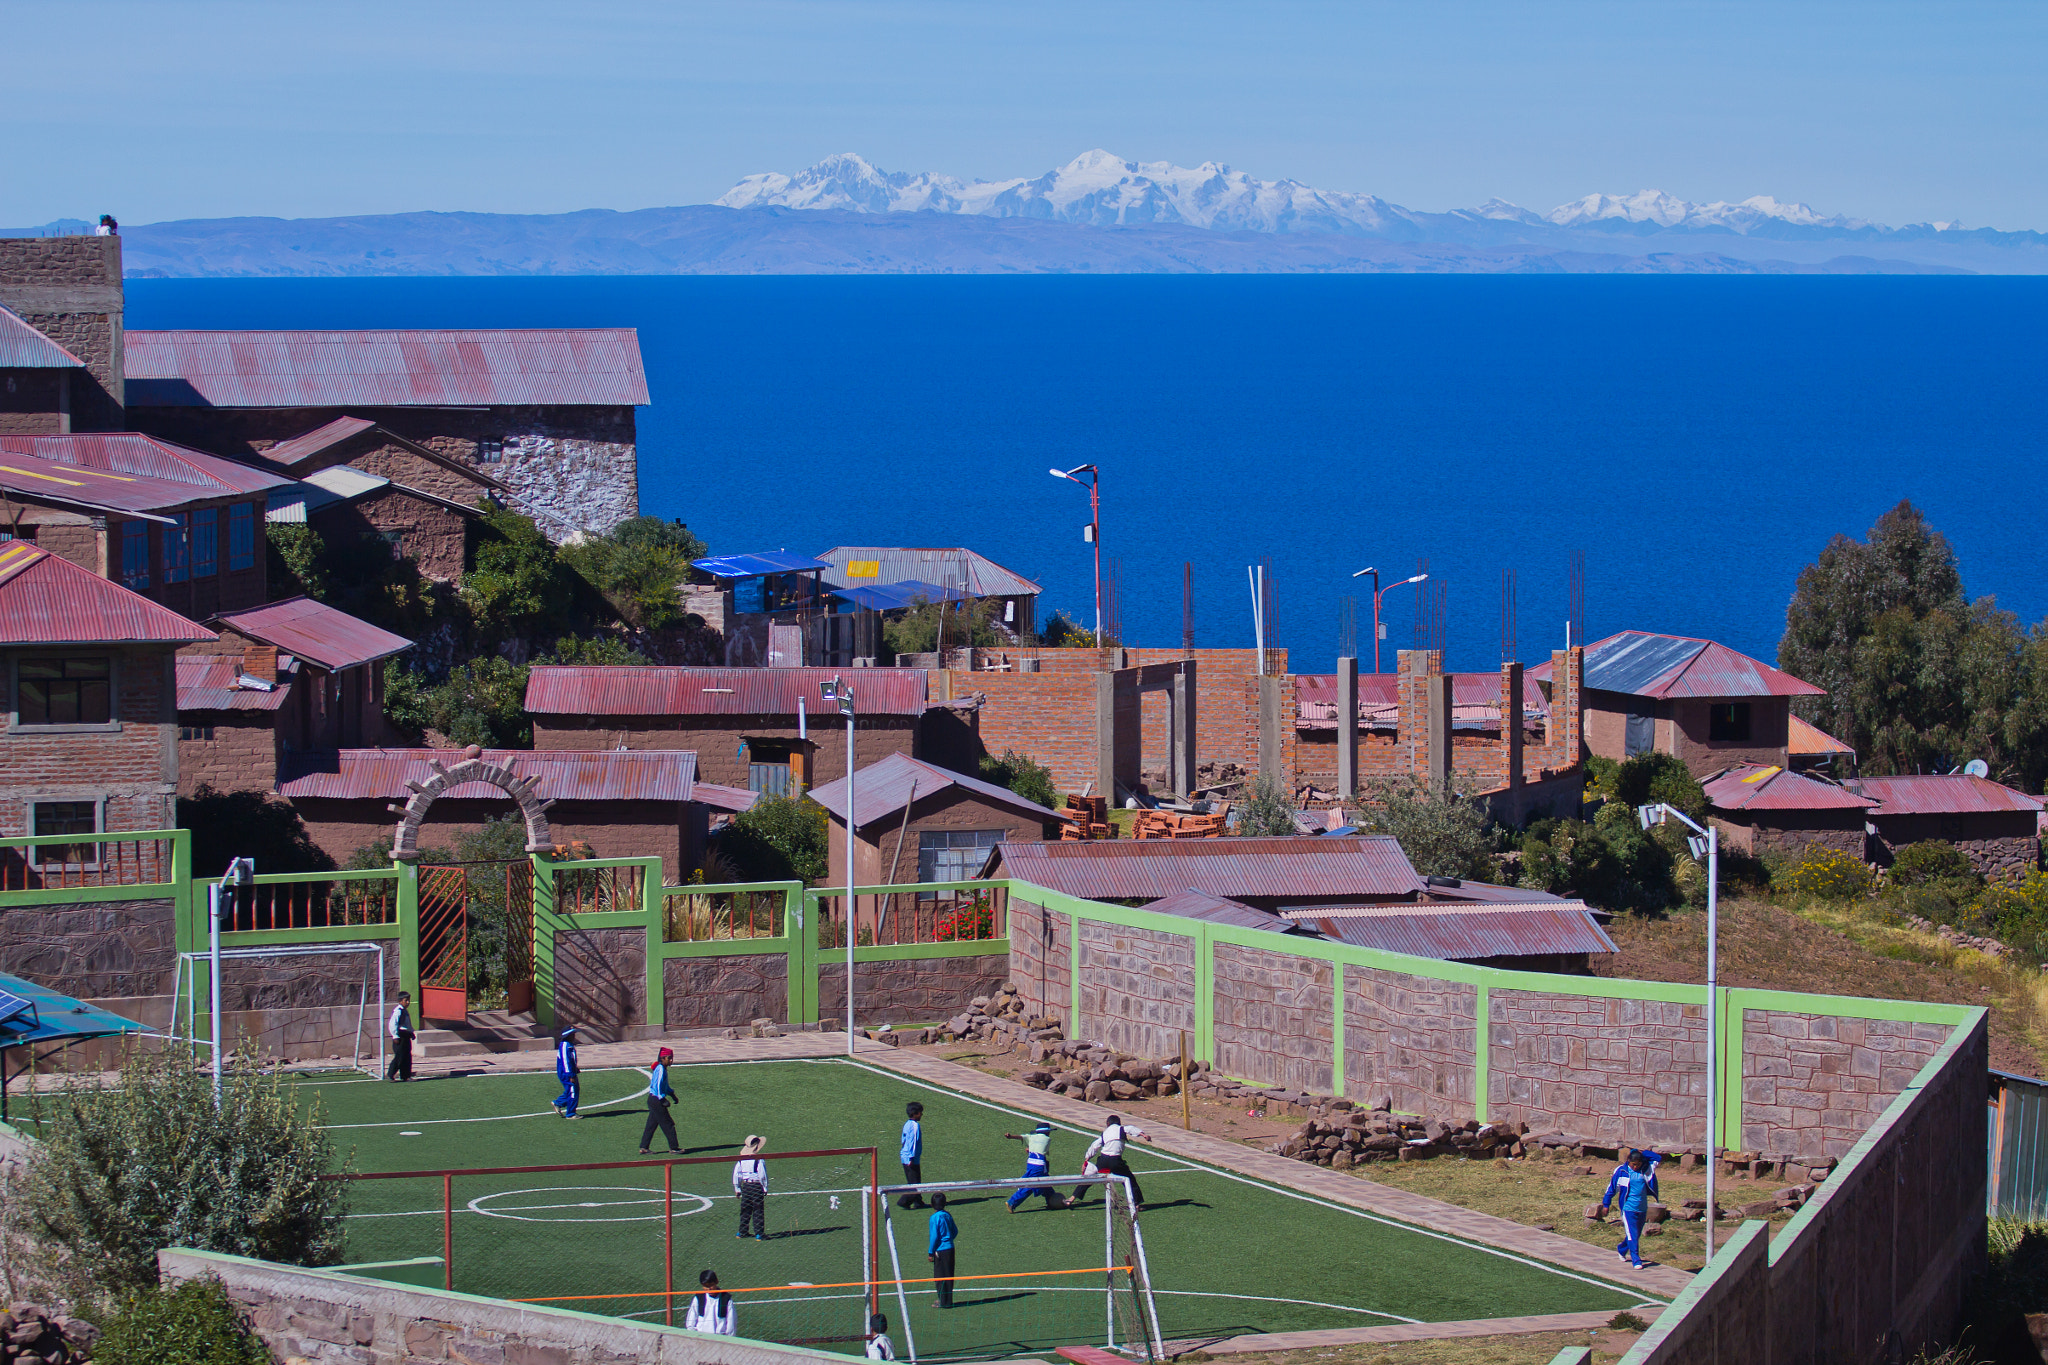 Taquile Island Football Pitch